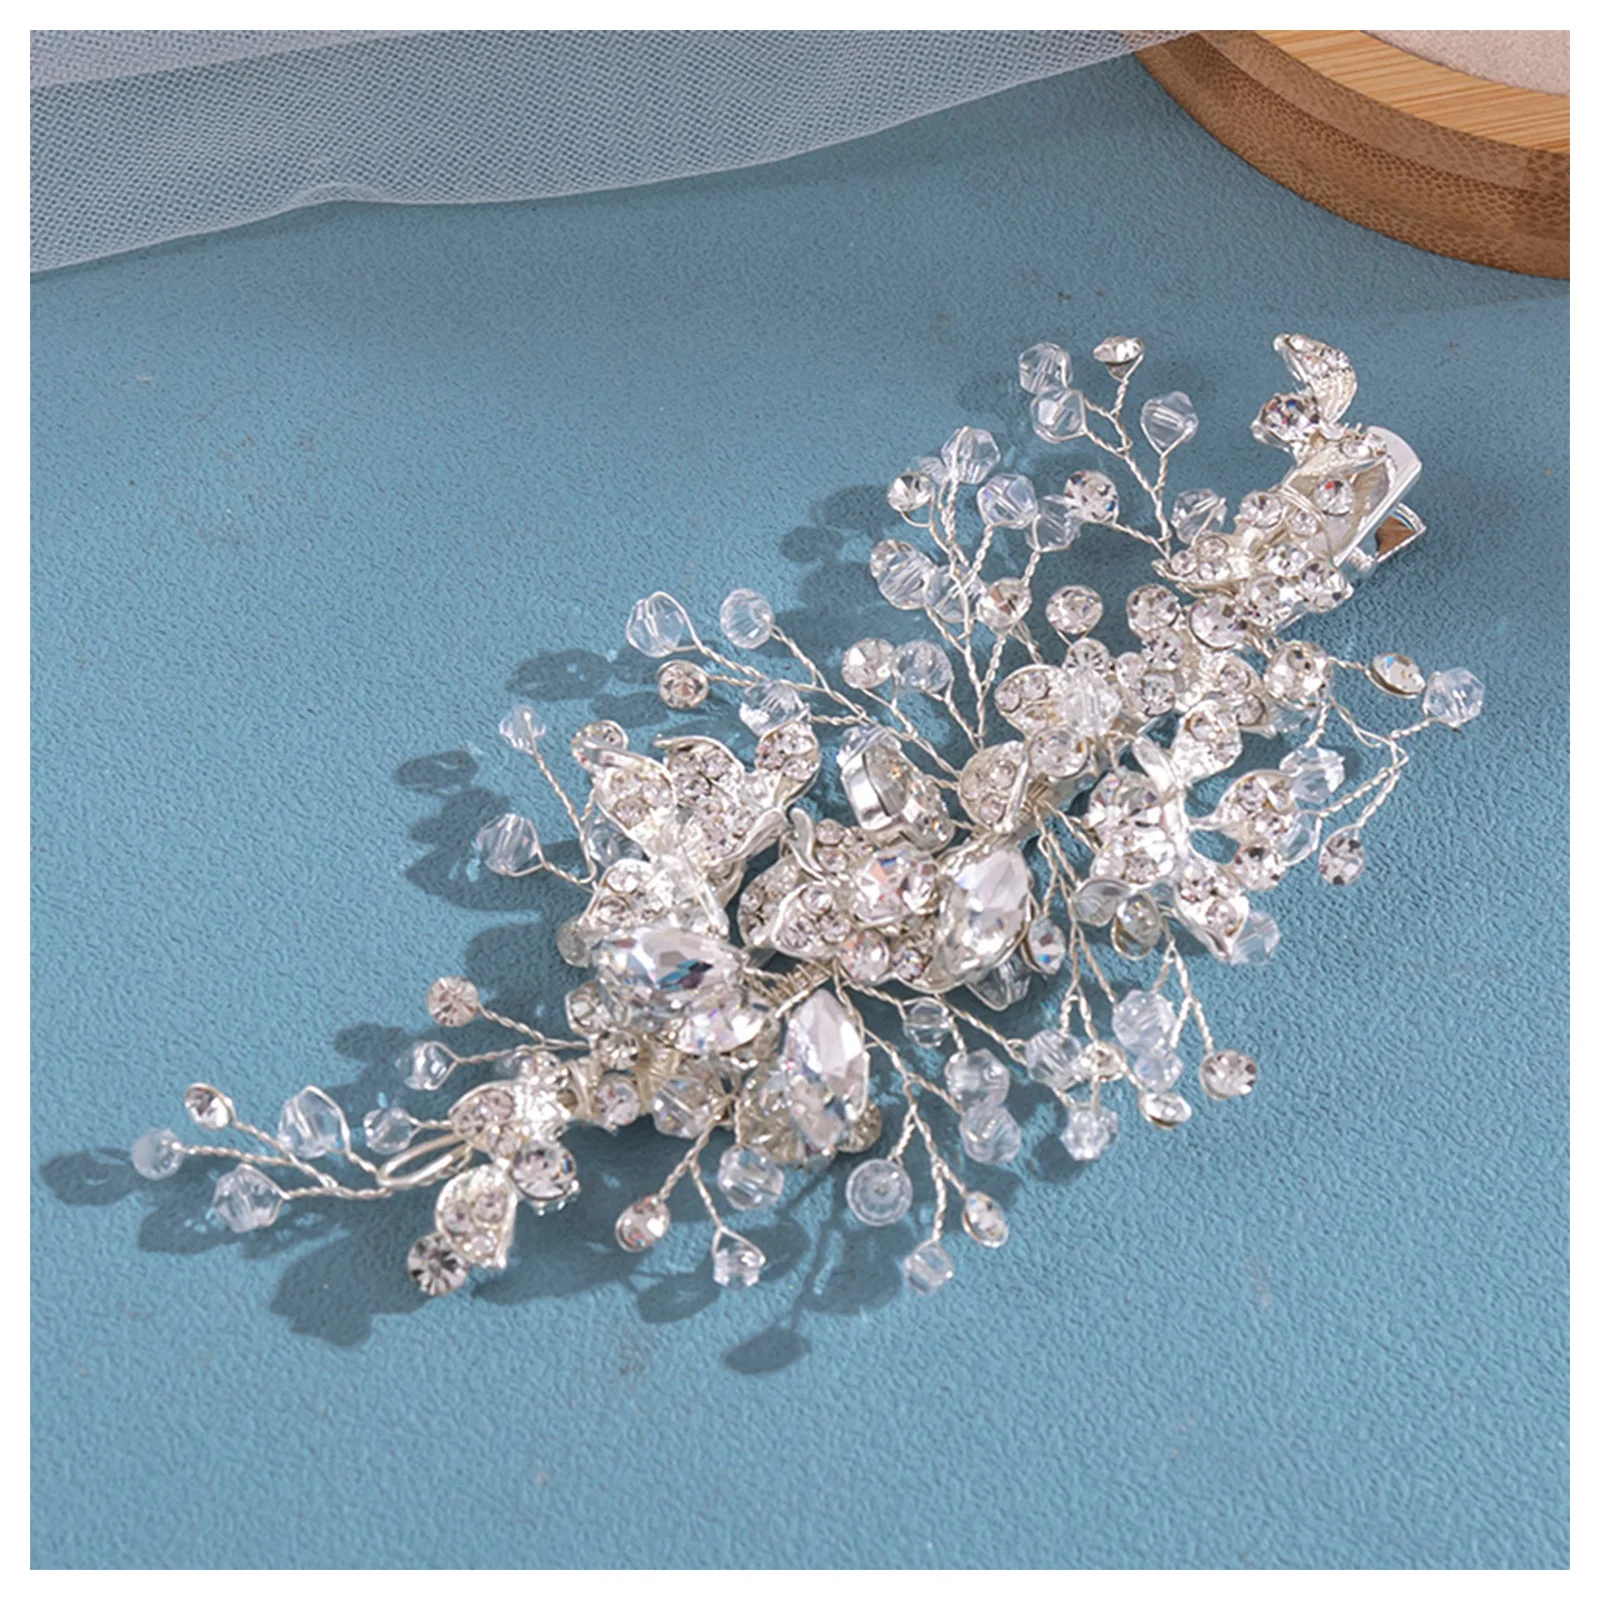 

Woman's Rhinestones Hair Clips Headpiece Dazzling Metal Flower Forehead Hairpins for Stage Party Show Decoration Newly